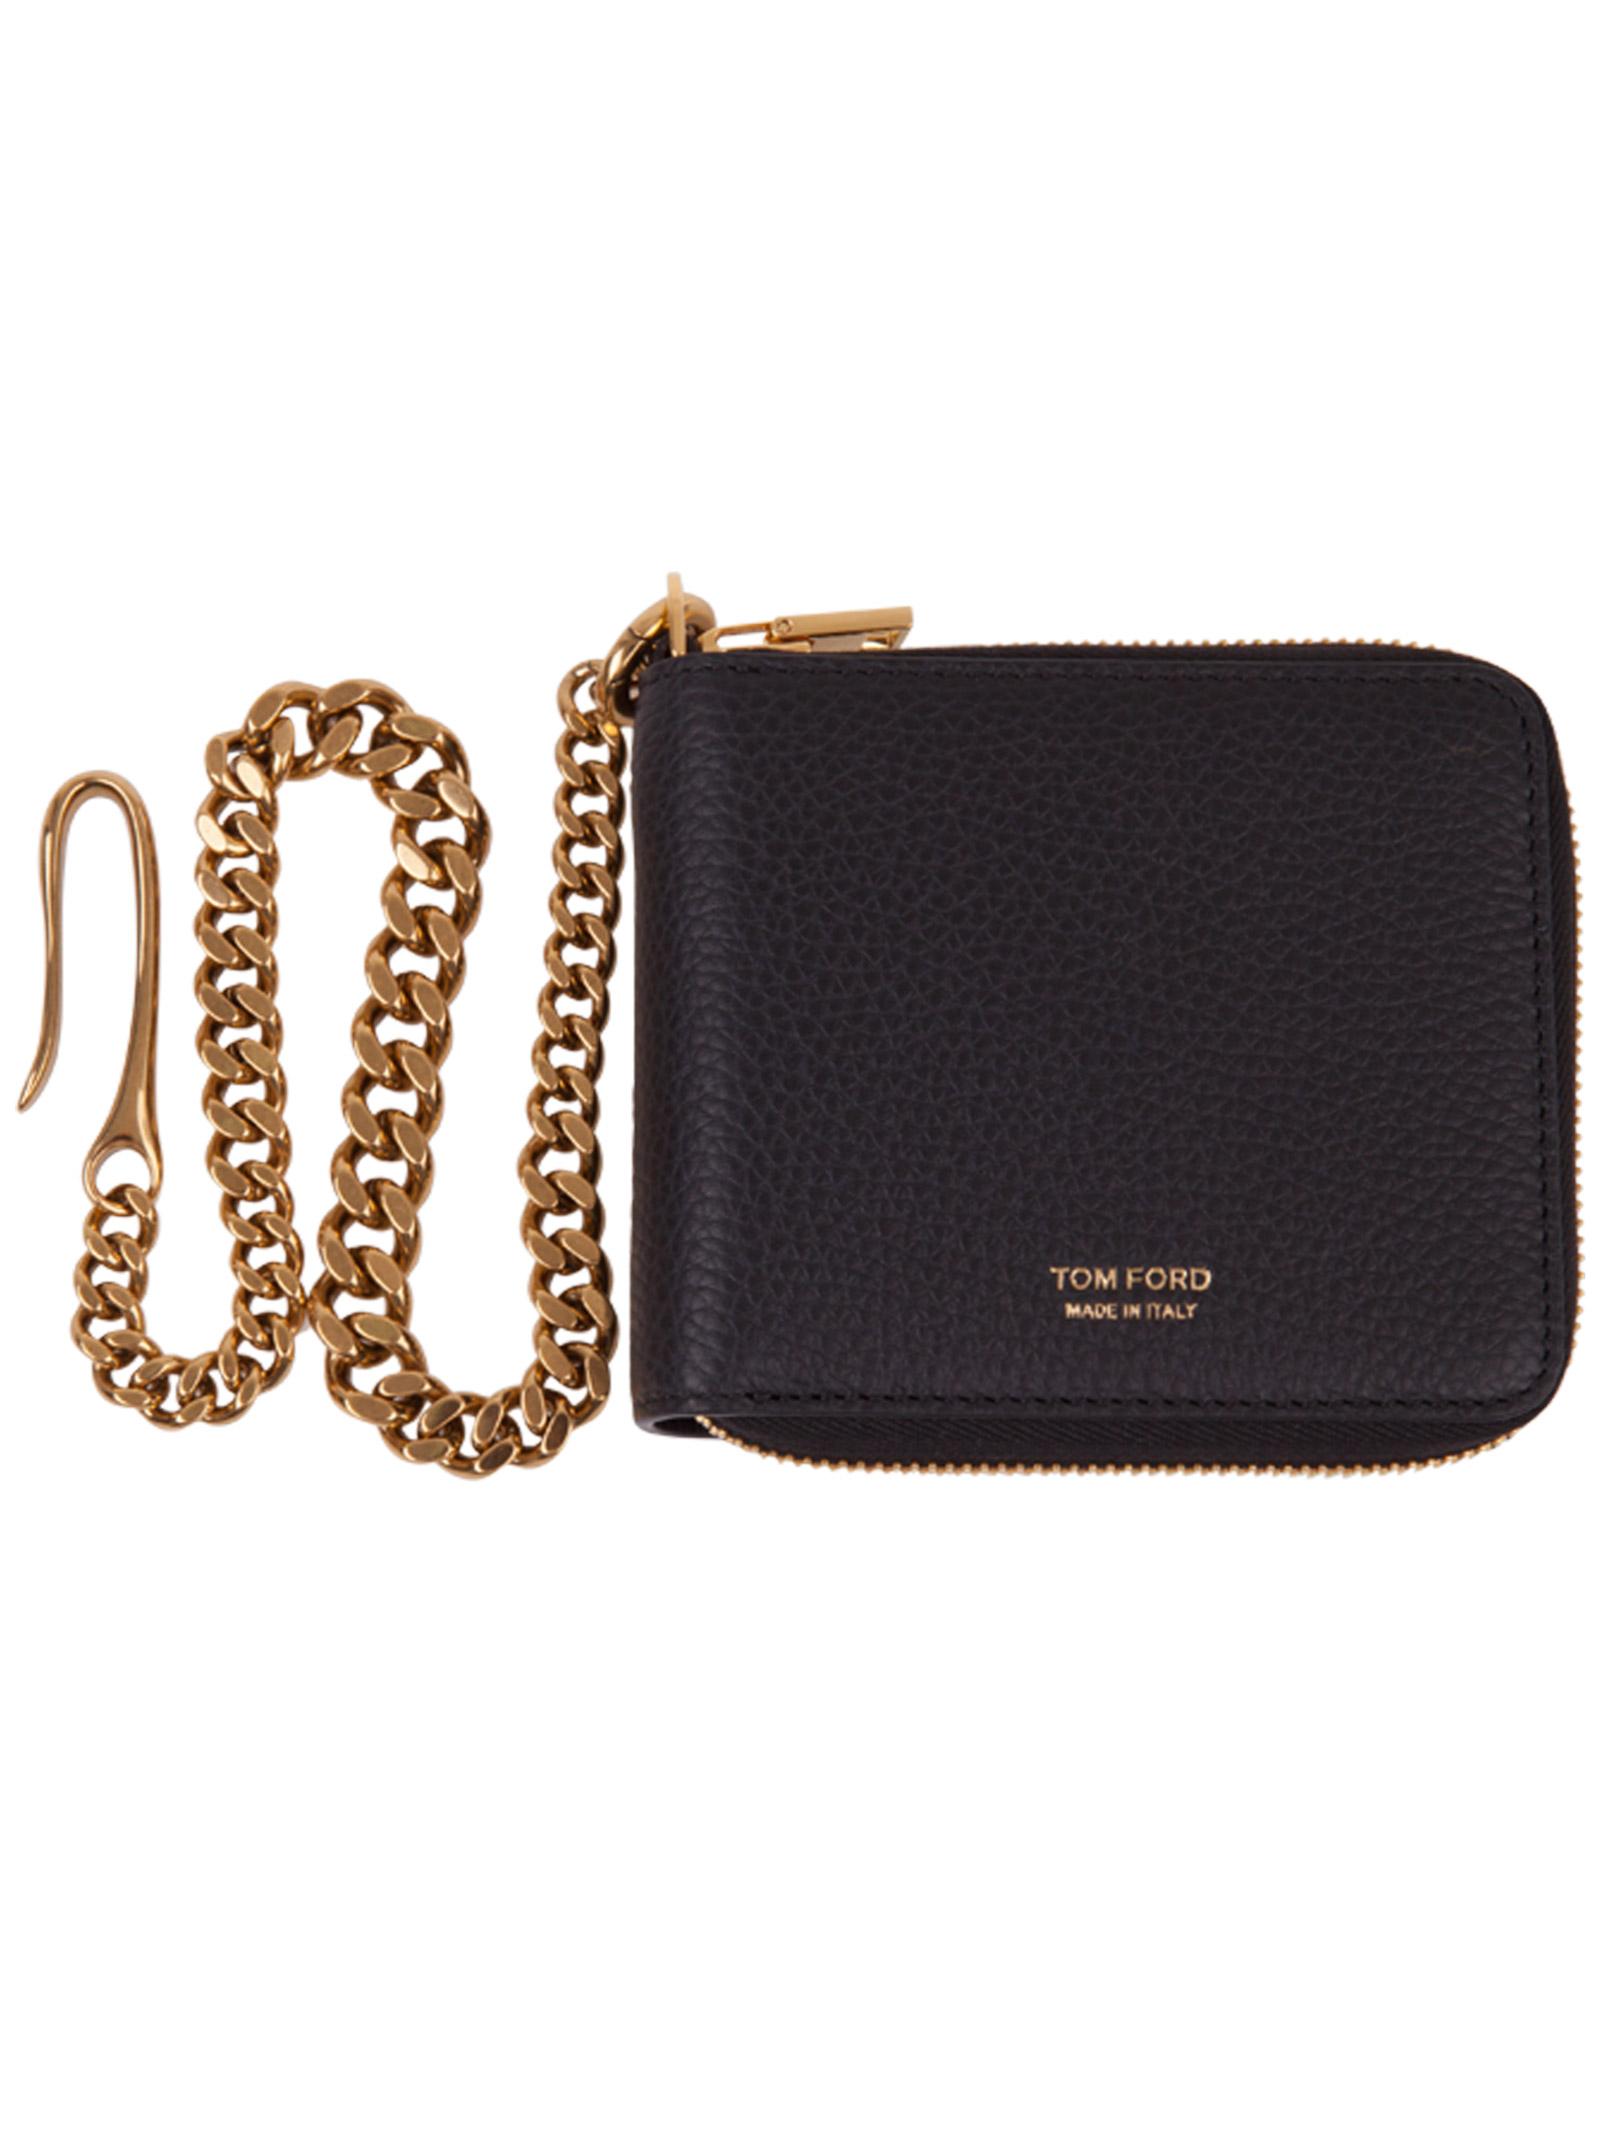 Tom Ford Black Wallet In Grained Leather With Golden Chain And All ...